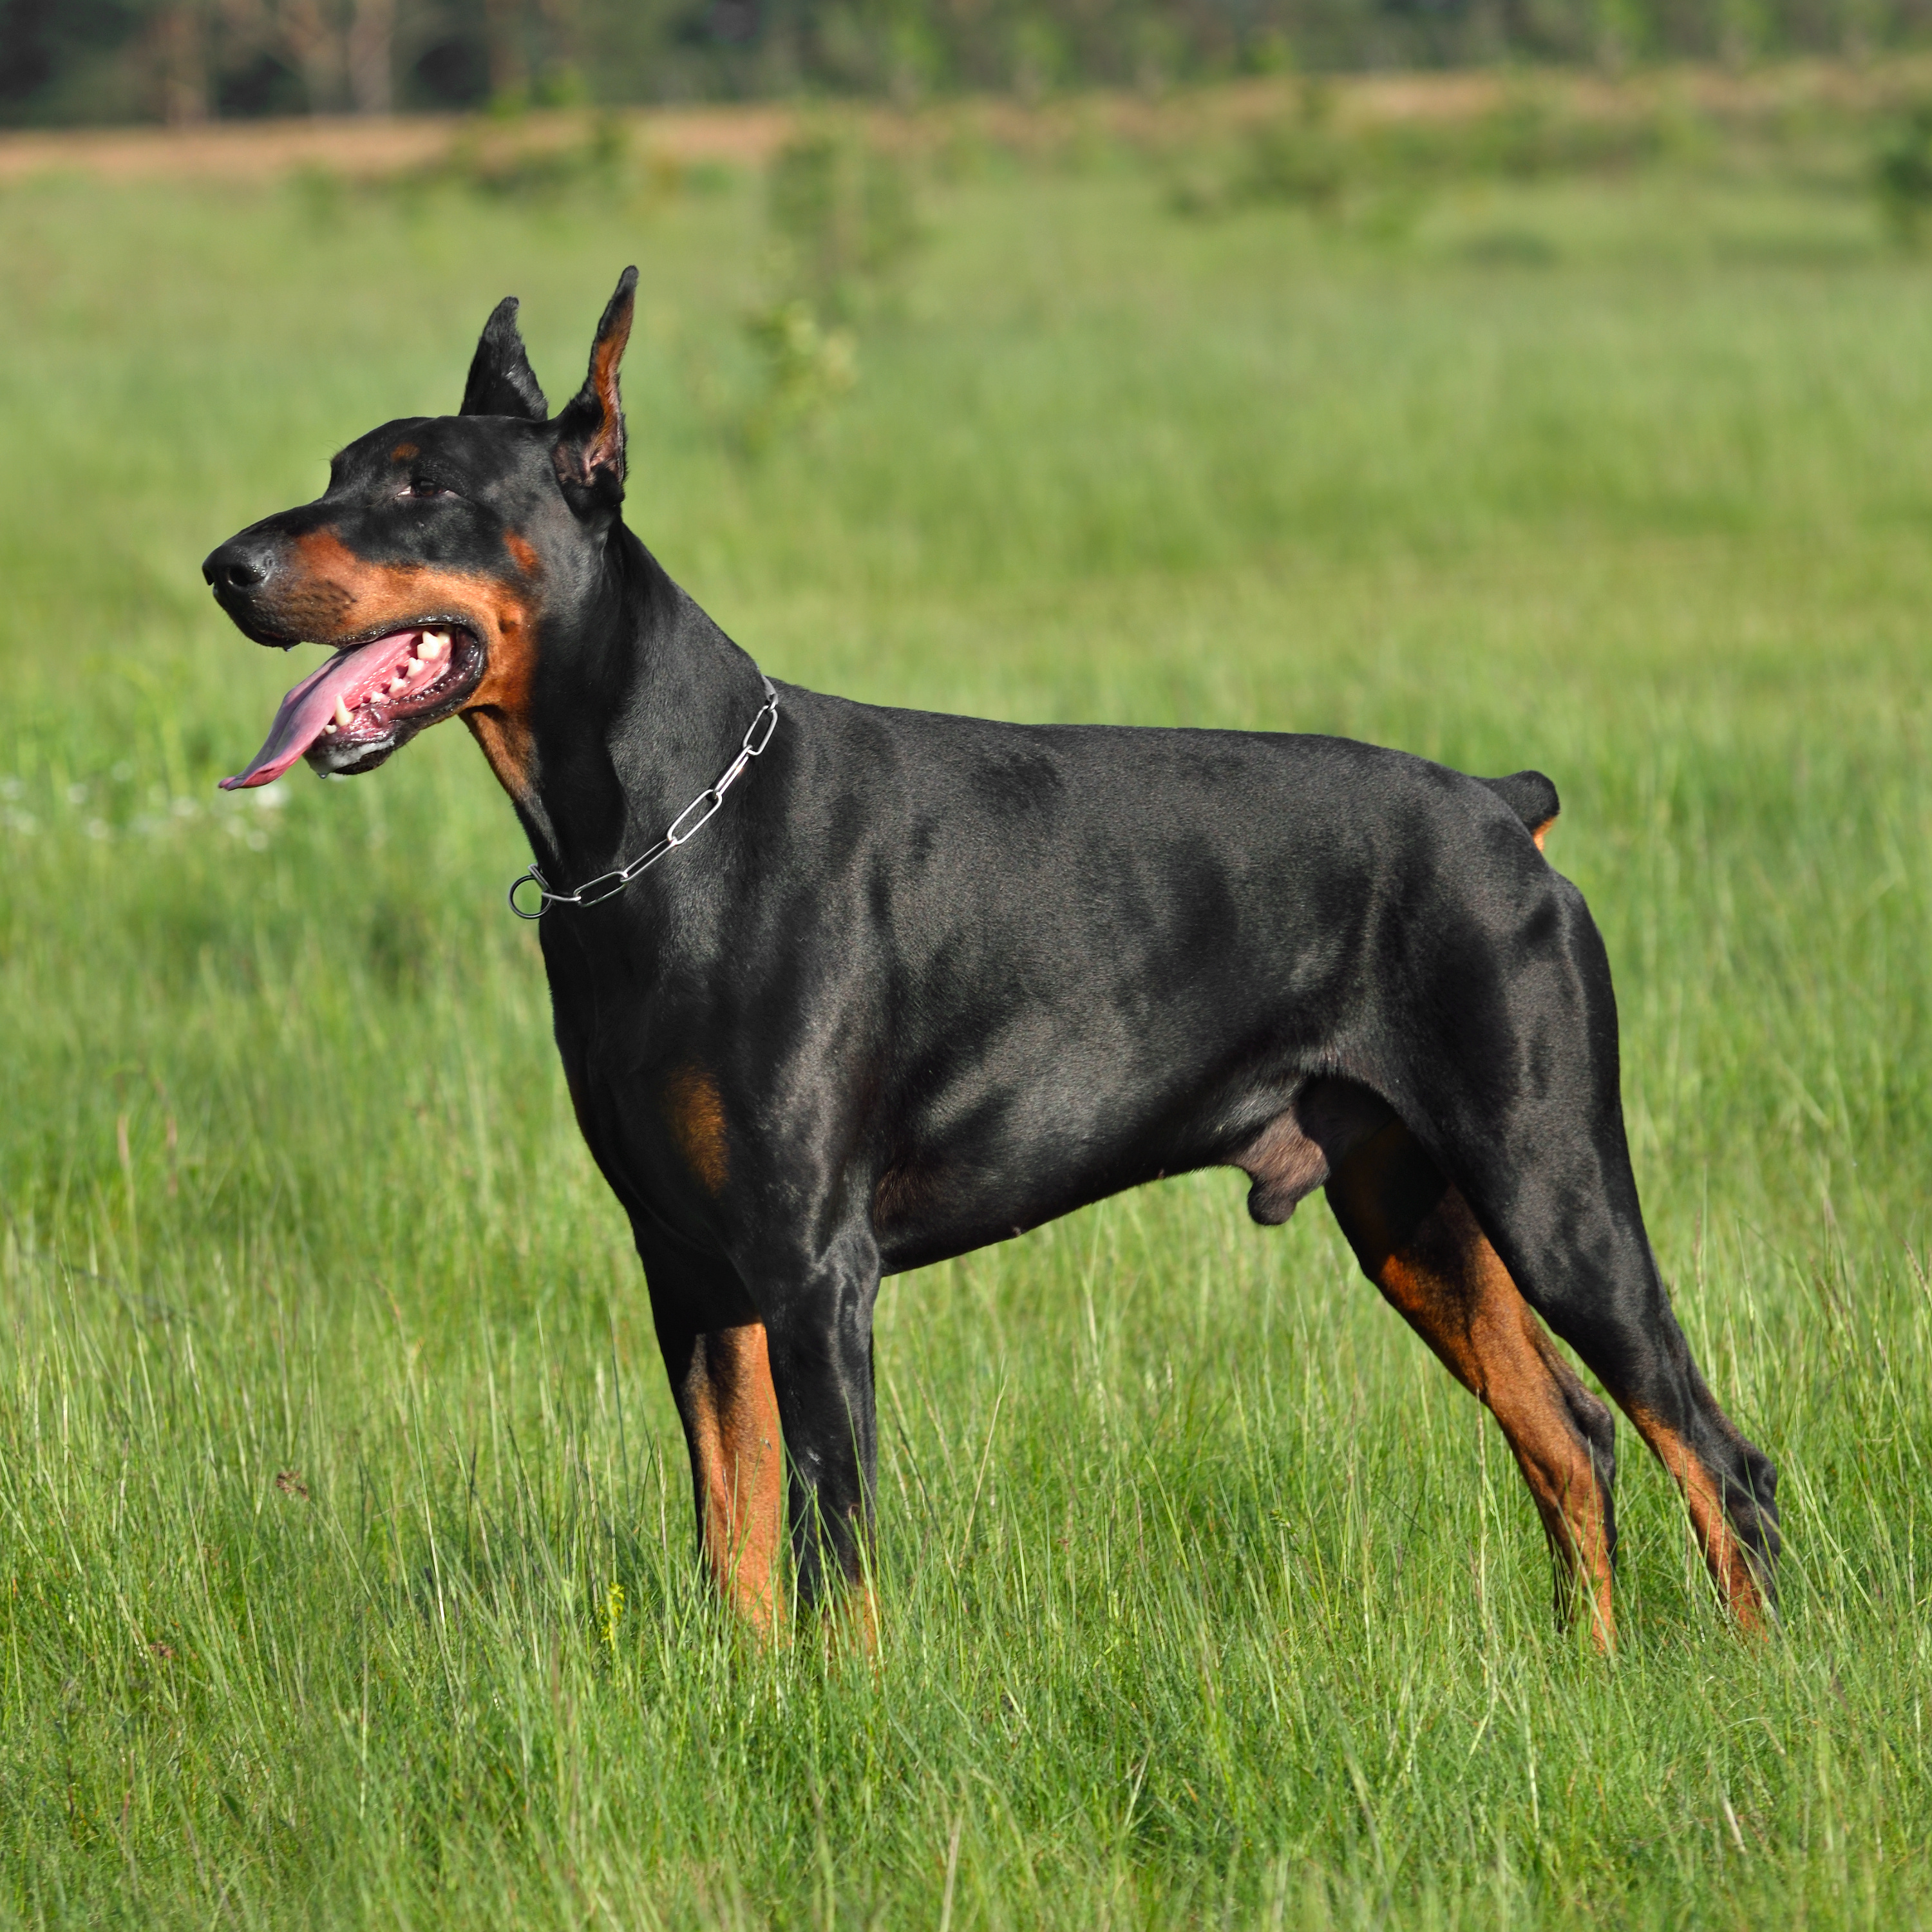 Dog Training Elite has expert Doberman training in Albuquerque / Santa Fe, NM
																															 that are experienced in a variety of positive training methods for Dobermans.